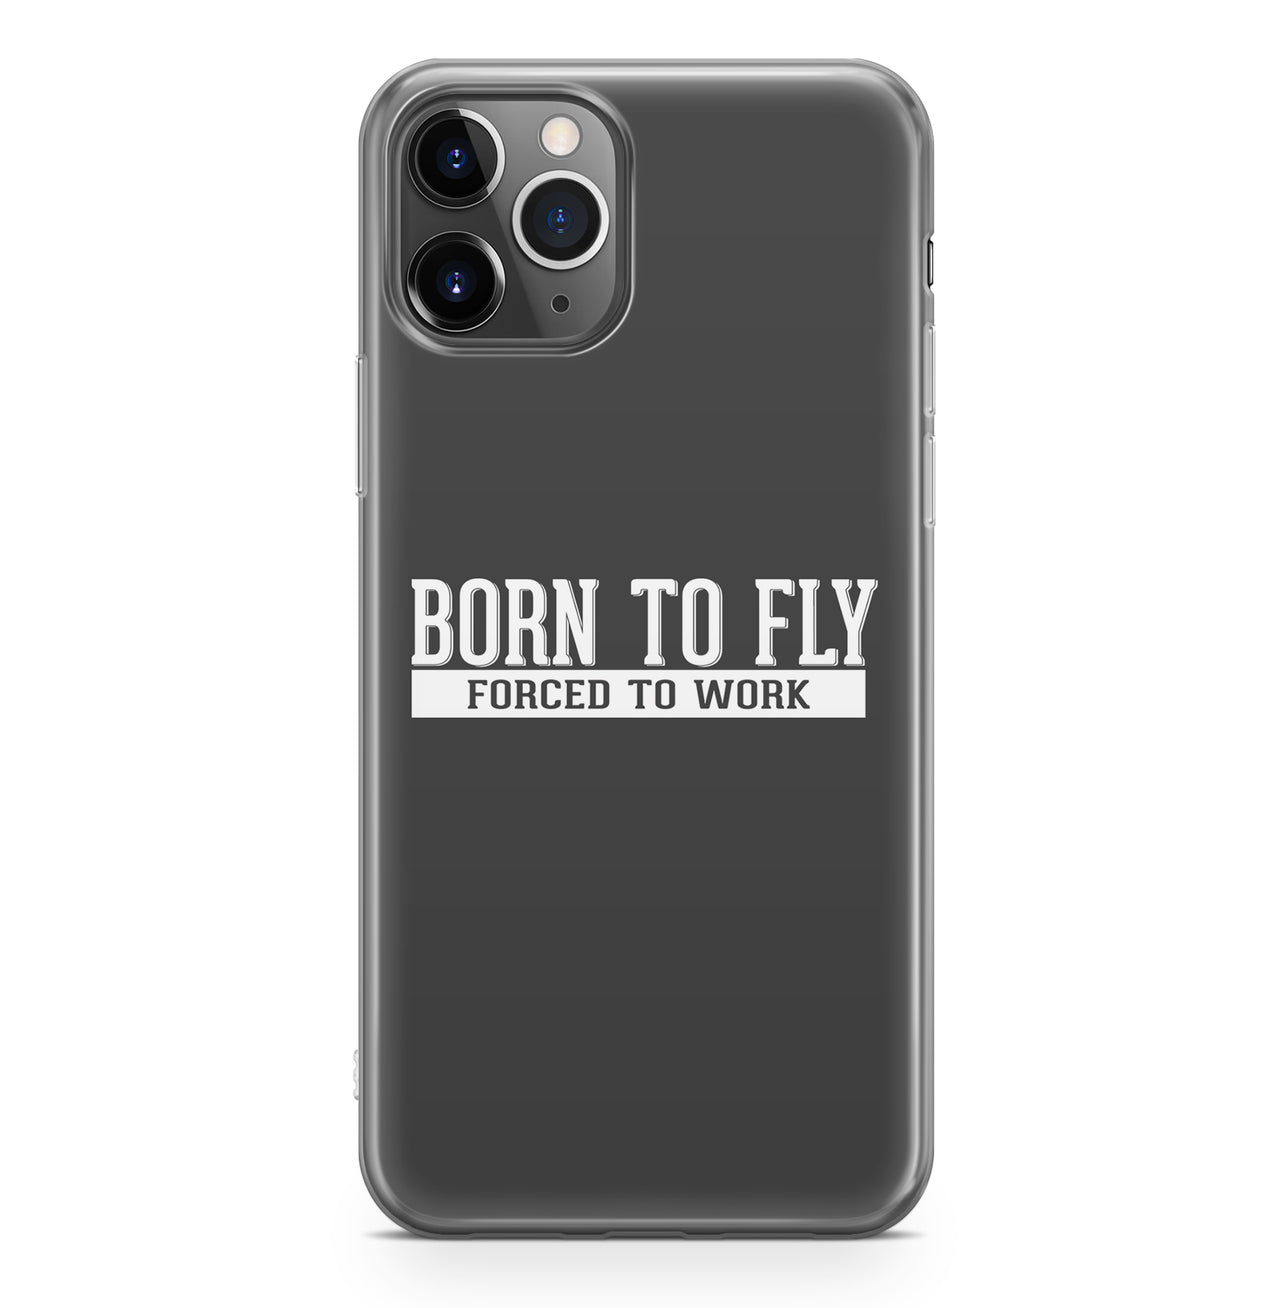 Born To Fly Forced To Work Designed iPhone Cases